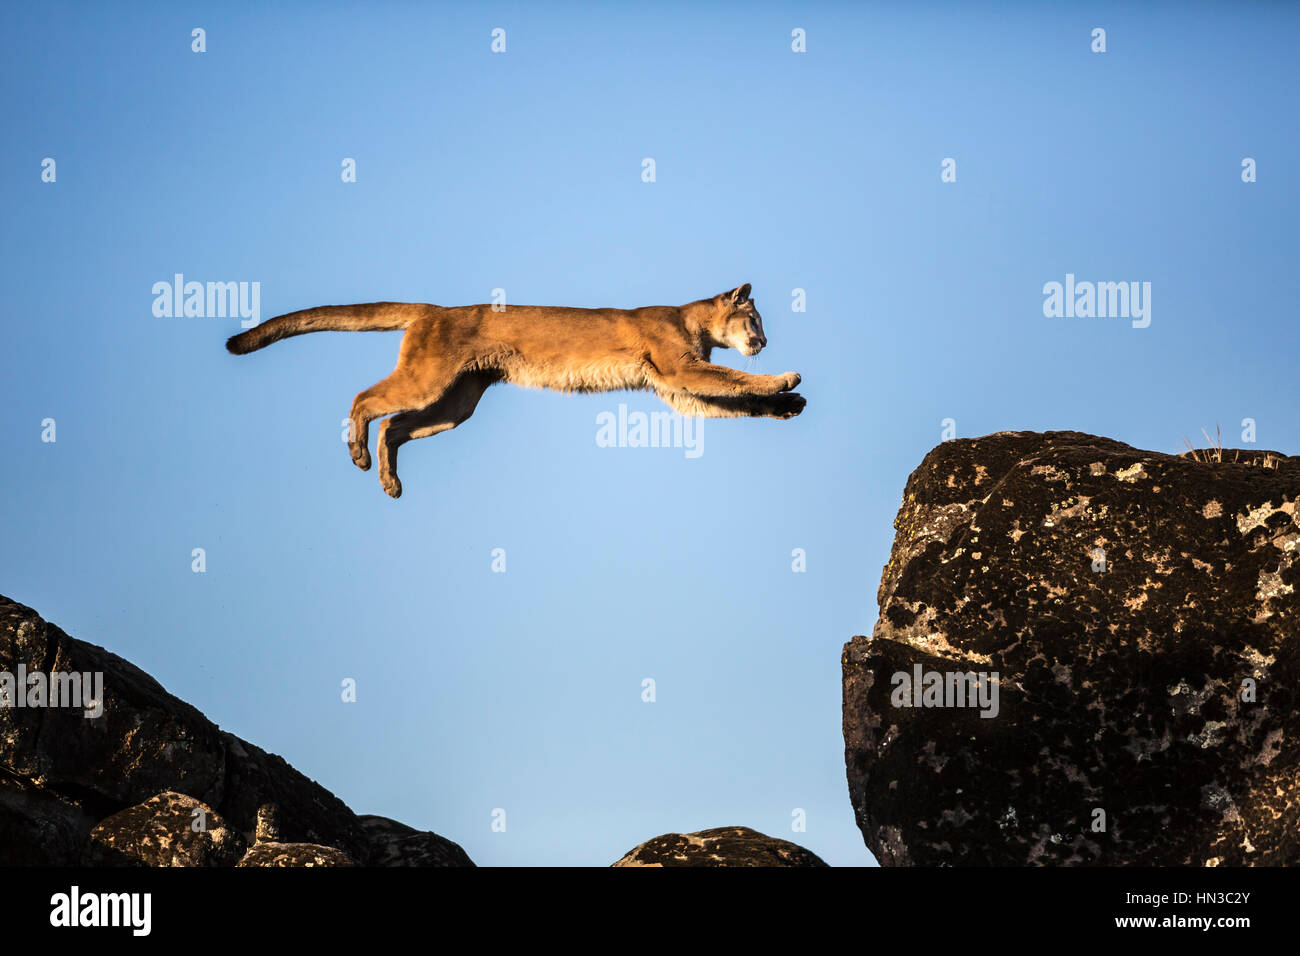 Page 3 - Puma Jumping High Resolution Stock Photography and Images - Alamy